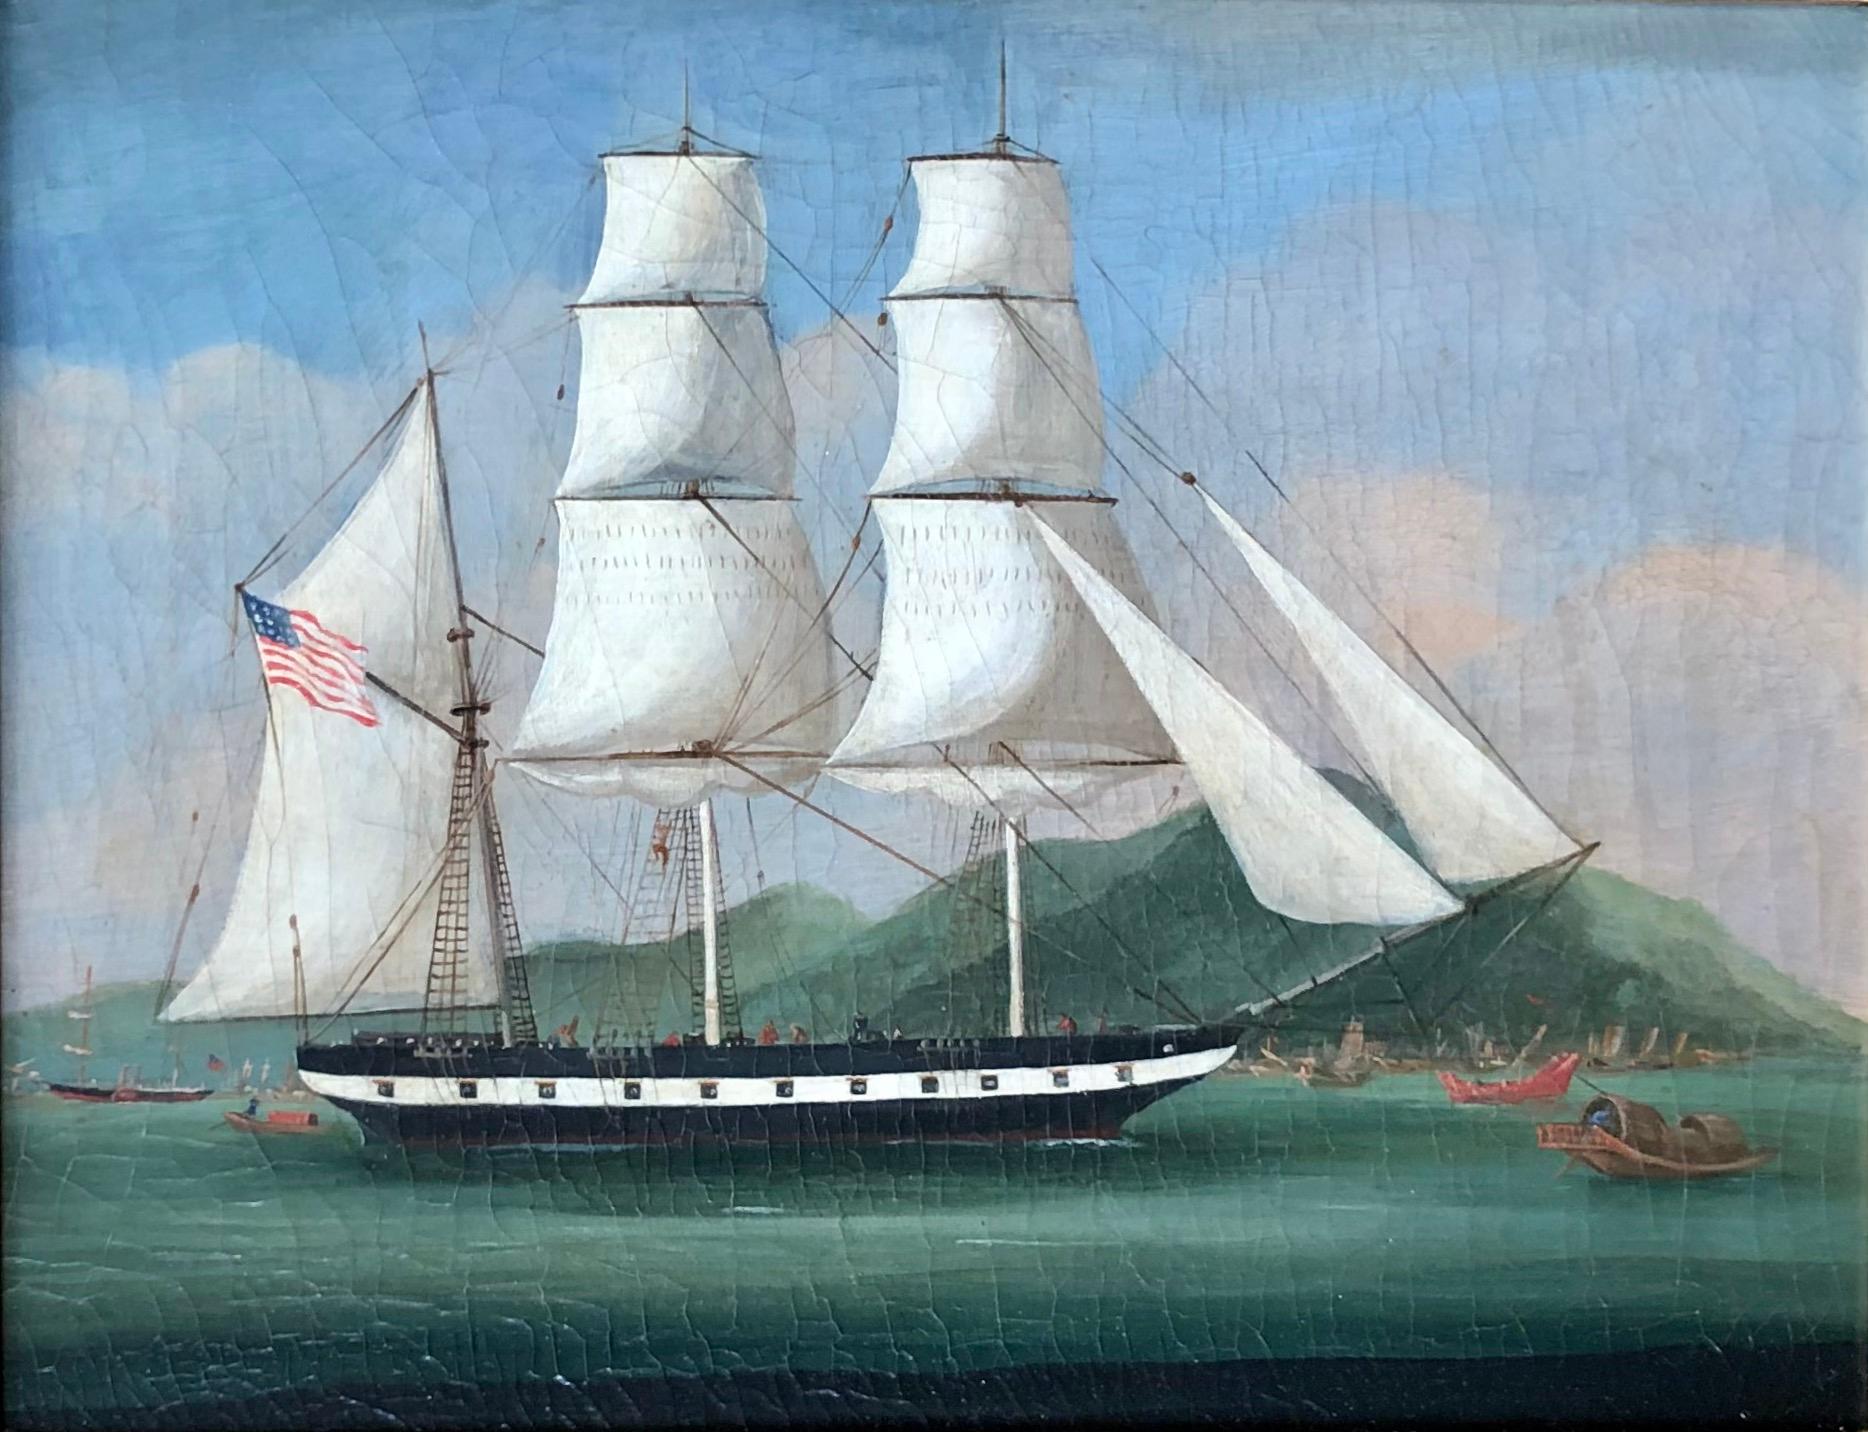 Possibly the Niantic, a whale ship that traveled to China around 1840 and then back to San Francisco during the gold rush. It is a very similar style and has the same number of guns. The ship was later turned into a hotel in San Francisco. 

The